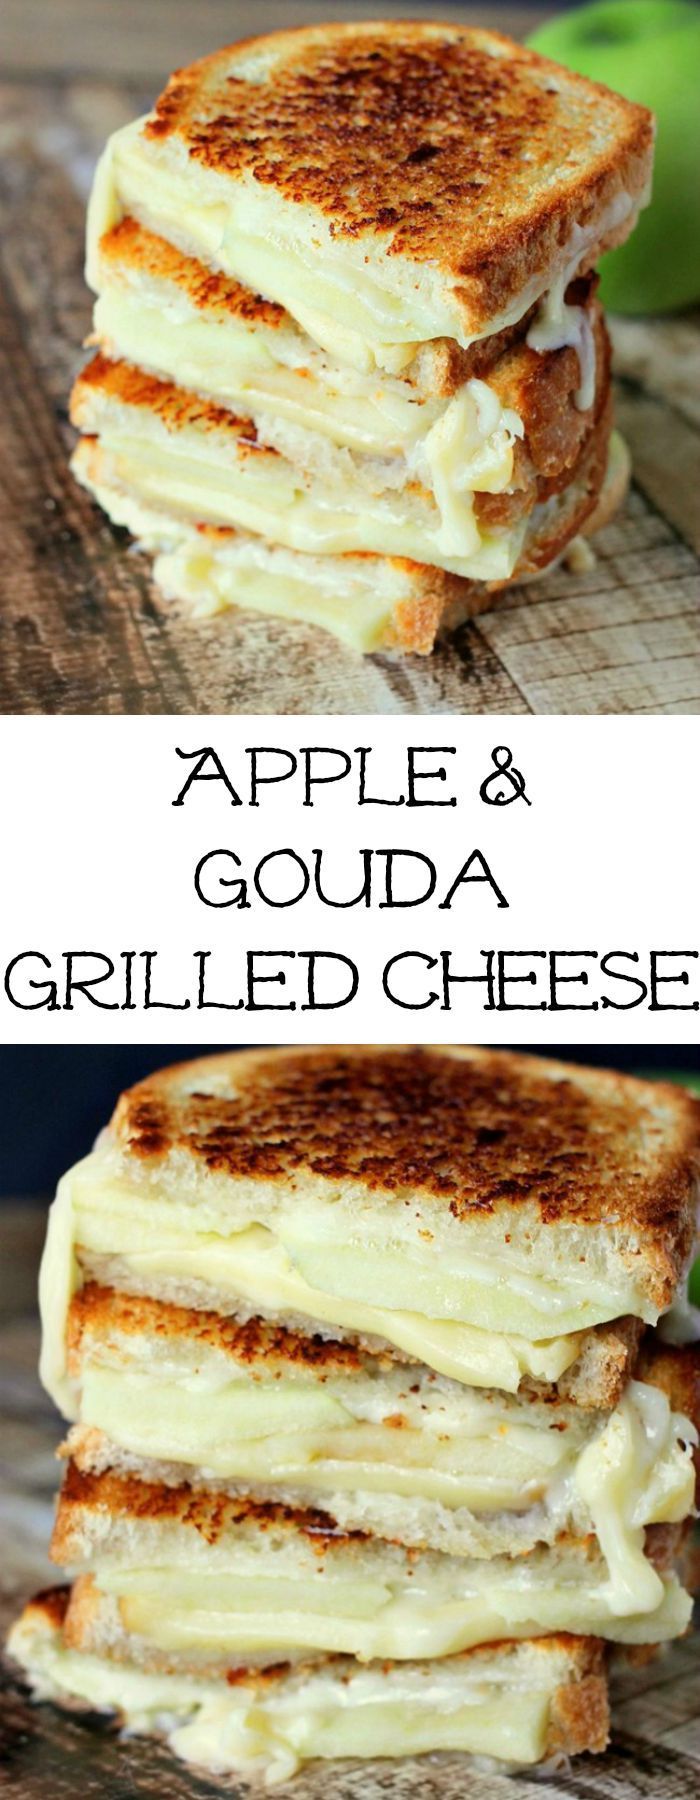 Apple & Gouda Grilled Cheese is perfect for fall and those granny smith apples! Savory and delicious! -   23 fall dinner recipes
 ideas